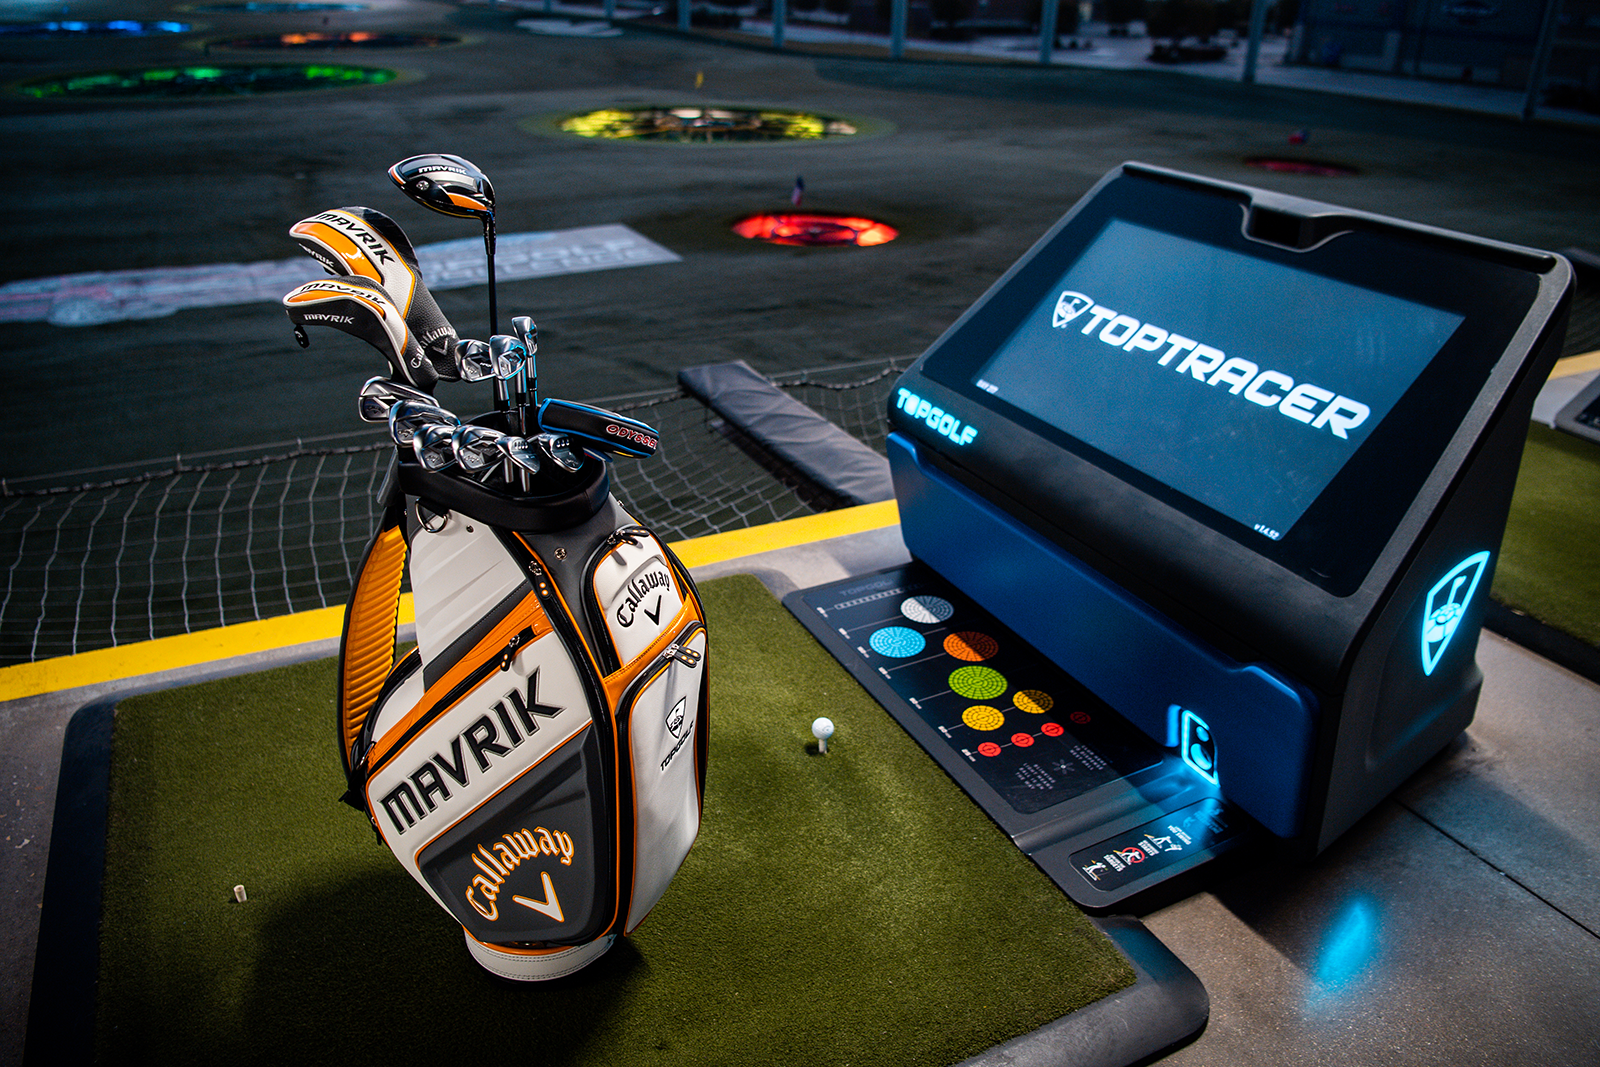 Callaway and Topgolf to combine, creating a global golf and entertainment leader